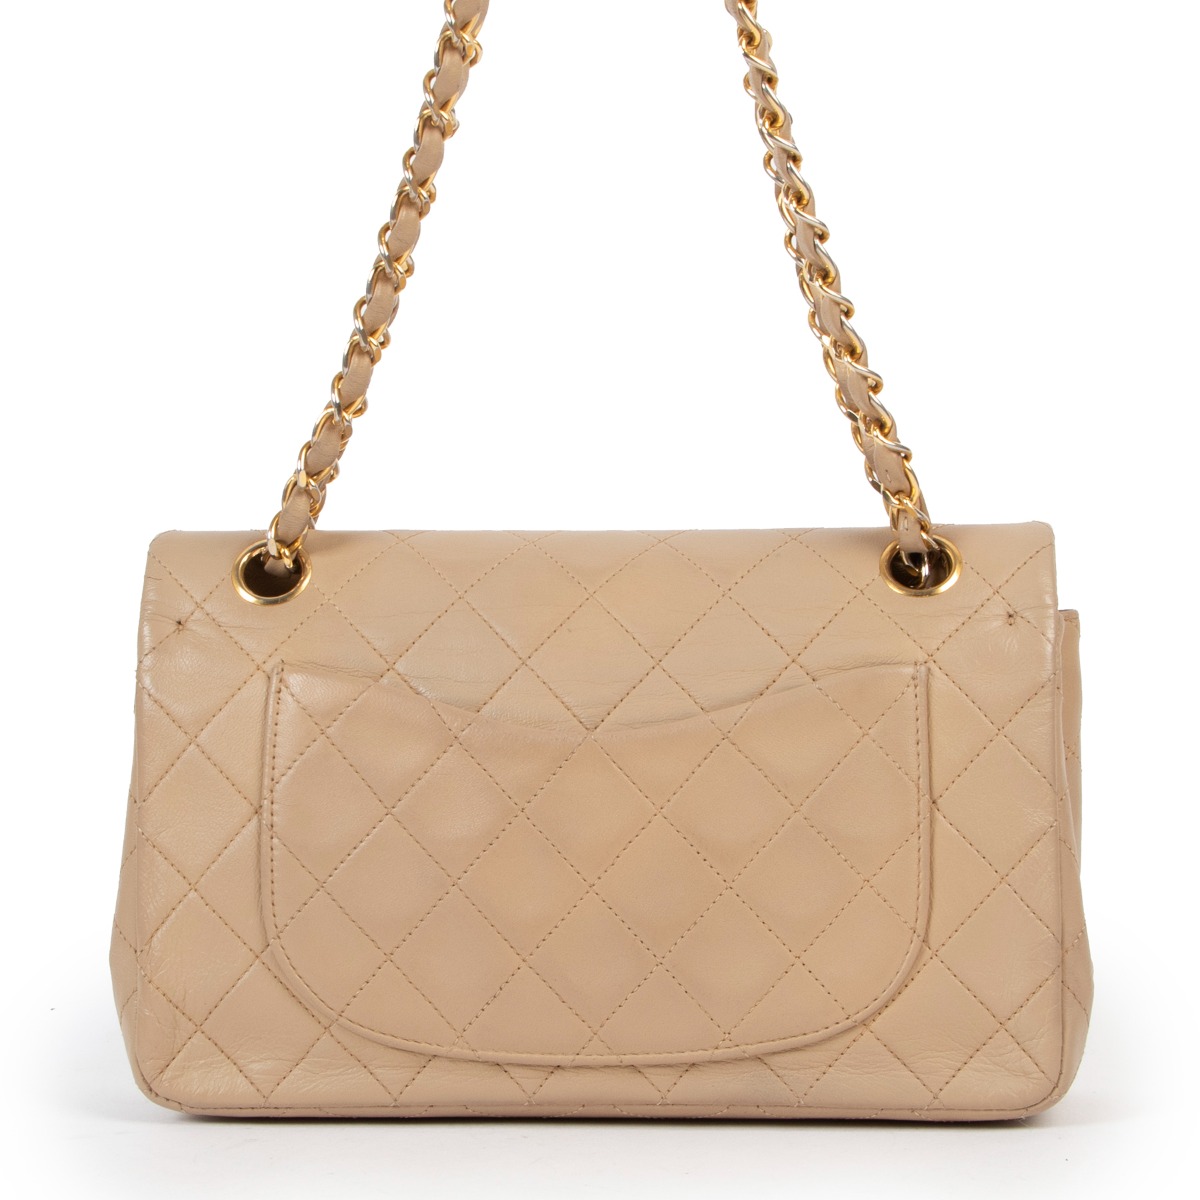 Chanel Fashion Therapy Small Flap Bag, Beige Caviar Leather, Brushed Gold  Hardware, New in Box